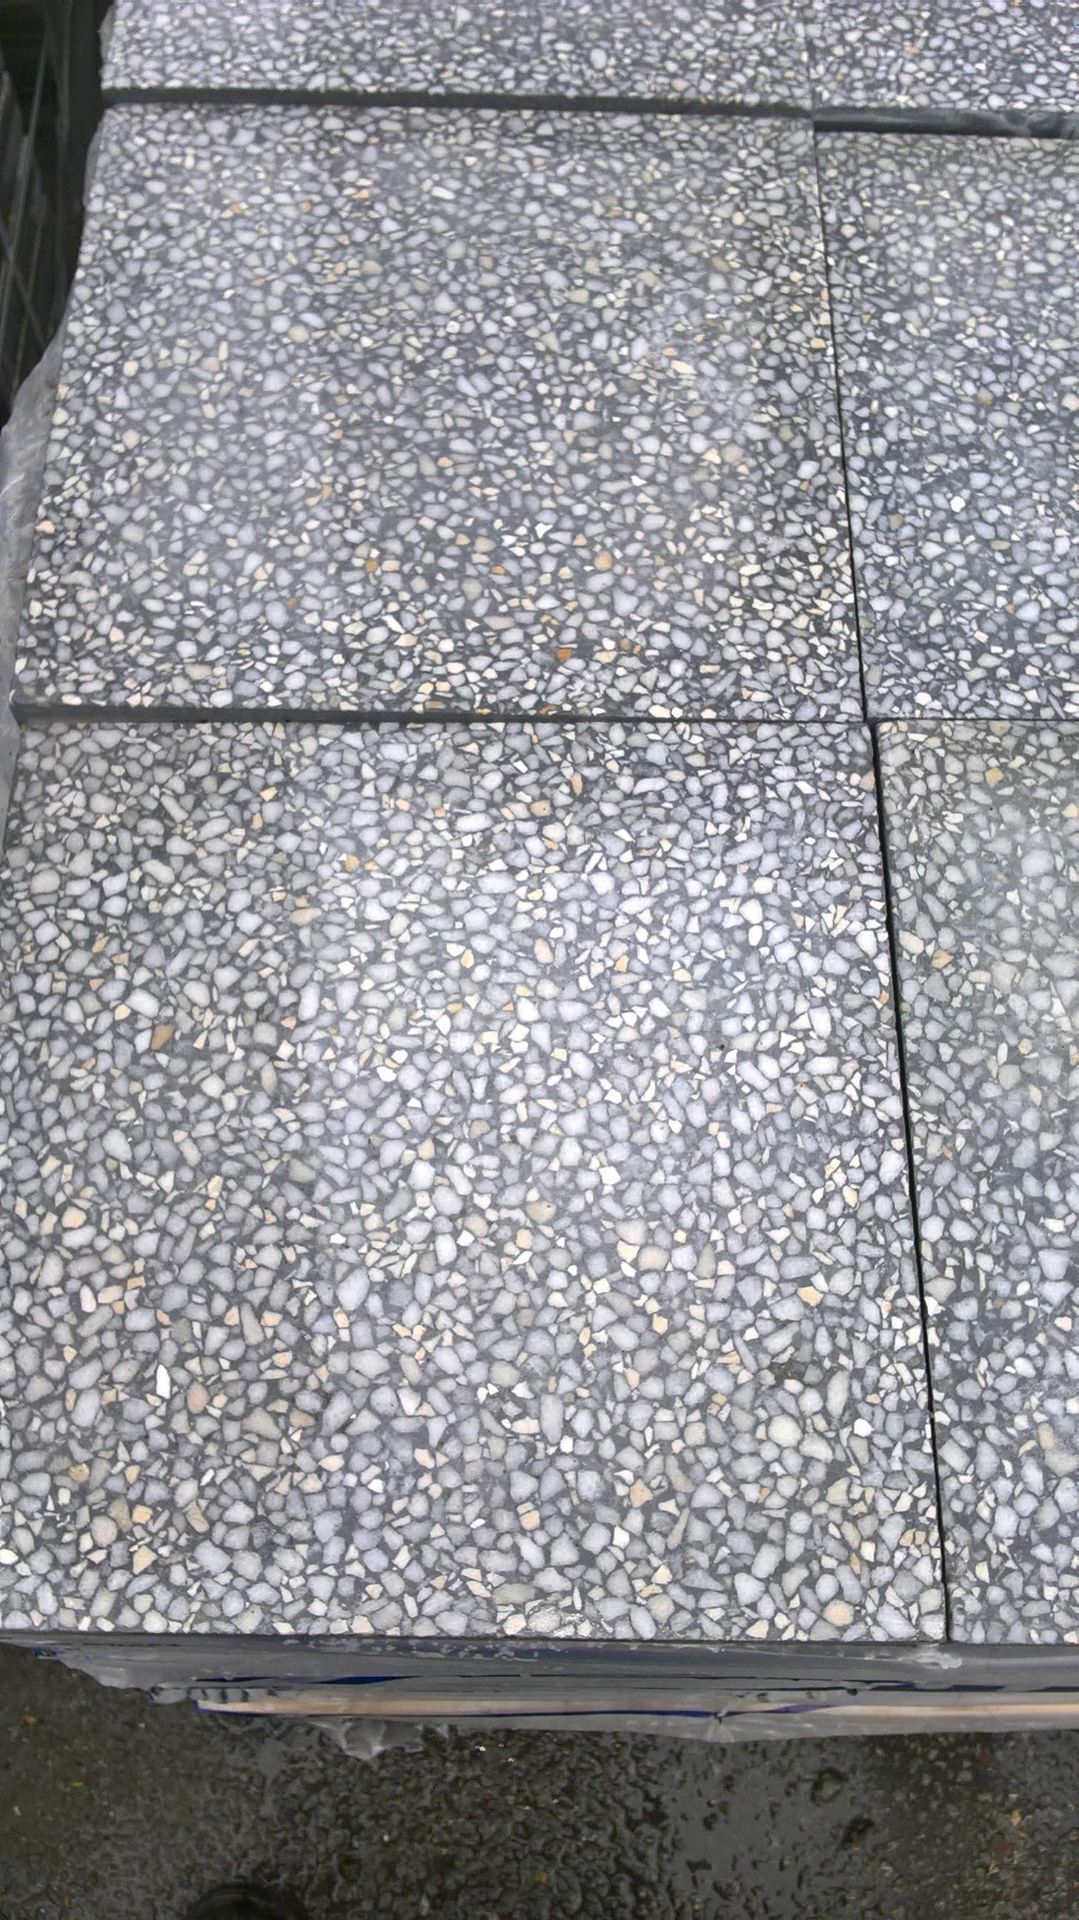 1 PALLET OF BRAND NEW GREY TERRAZZO COMMERCIAL TILES Z30099, COVERS 24 SQUARE YARDS